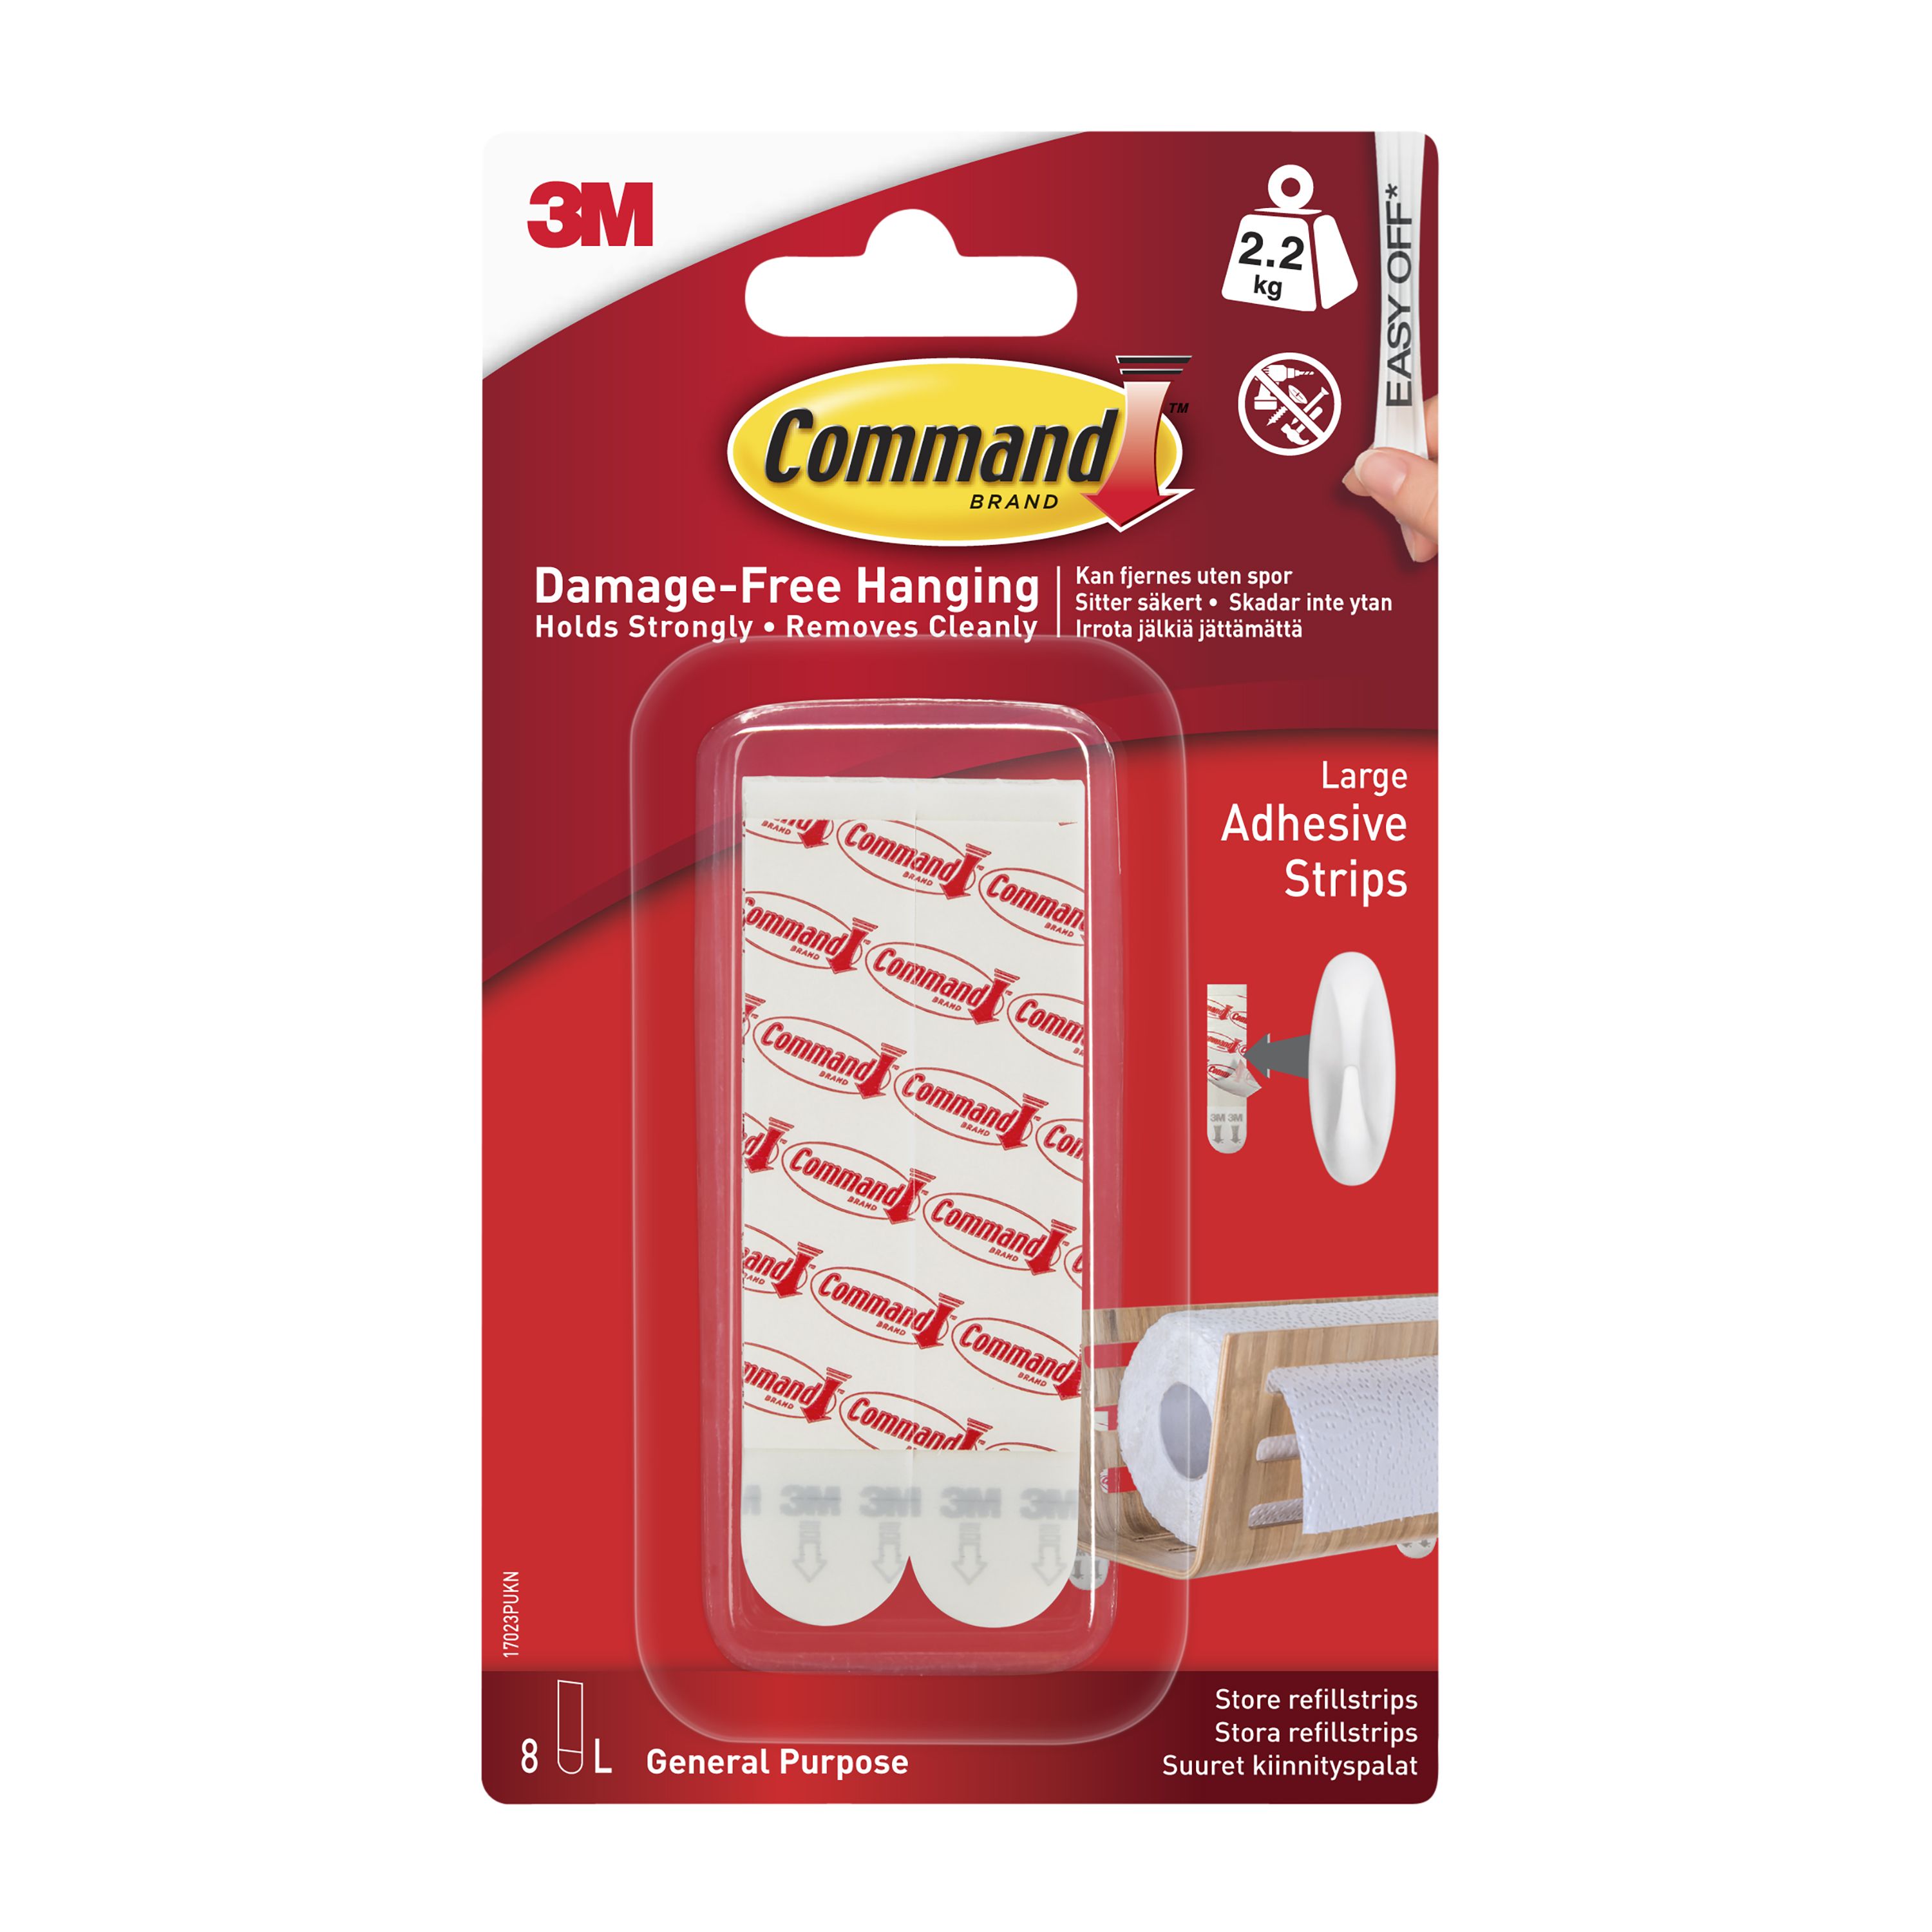 https://media.diy.com/is/image/Kingfisher/3m-command-large-white-adhesive-strip-holds-4-4kg-set-of-8~4054596460515_01c_bq?$MOB_PREV$&$width=618&$height=618